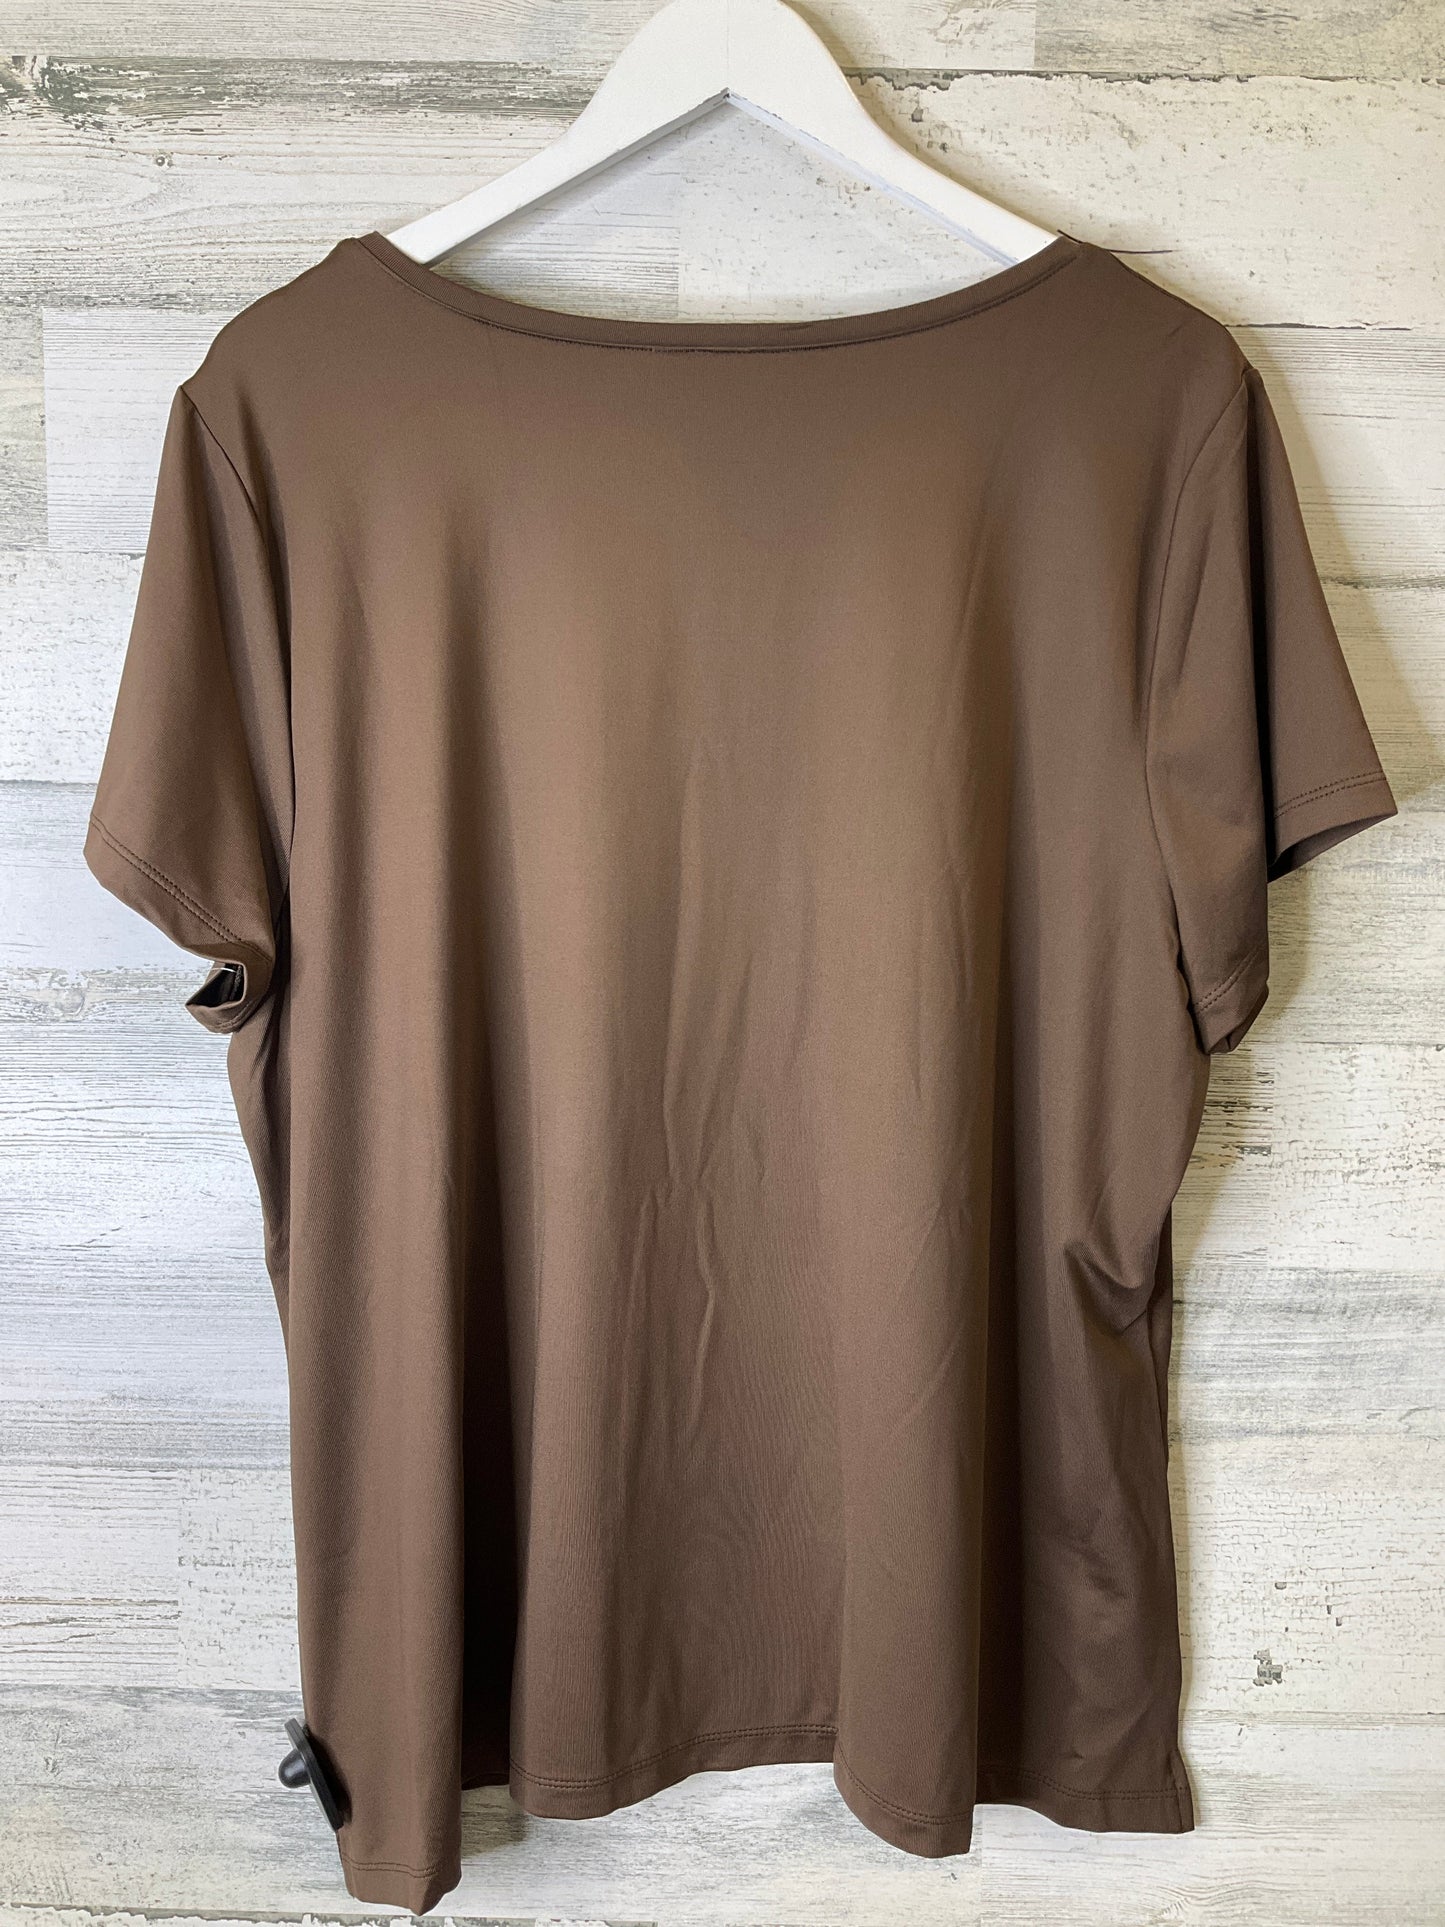 Brown Top Short Sleeve East 5th, Size 2x